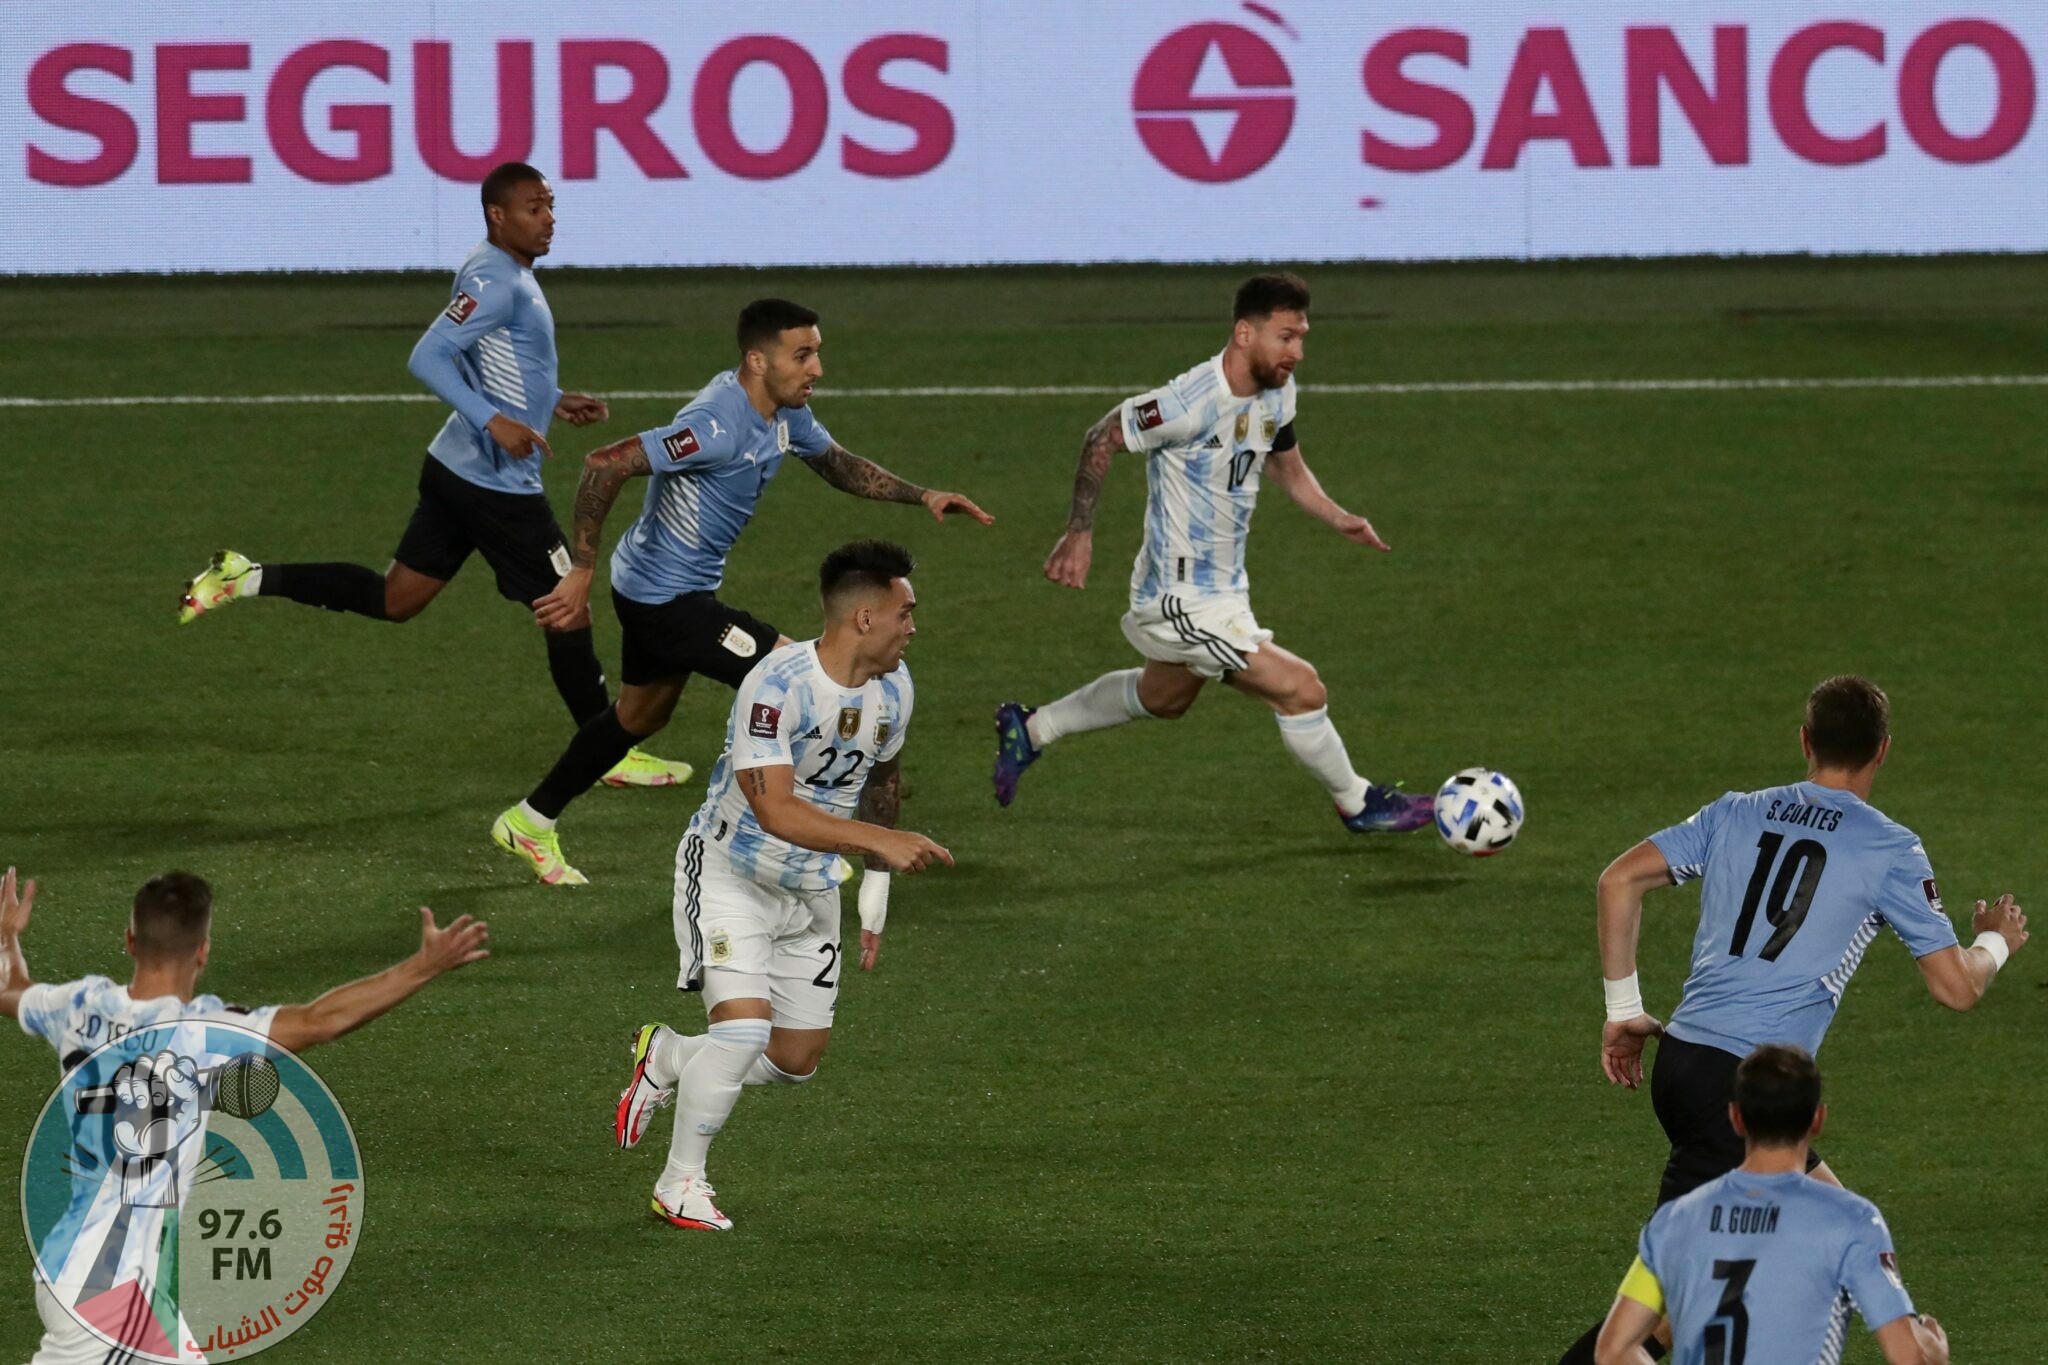 Argentina's Lionel Messi takes control of the ball during the South American qualification football match against Uruguay for the FIFA World Cup Qatar 2022 at the Monumental stadium in Buenos Aires, on October 10, 2021. (Photo by ALEJANDRO PAGNI / AFP)